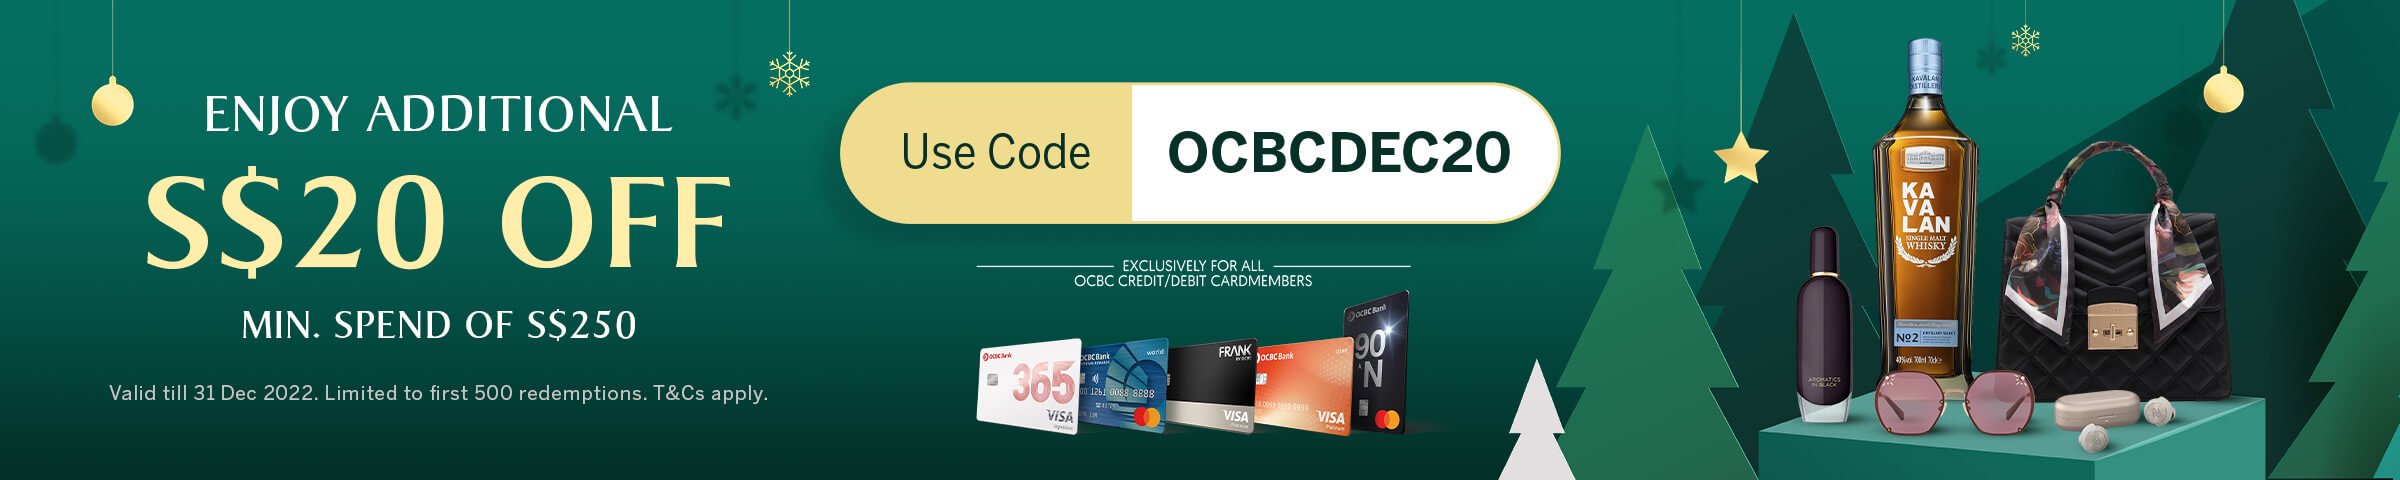 Exclusive Offer For OCBC Debit/Credit Cardmembers